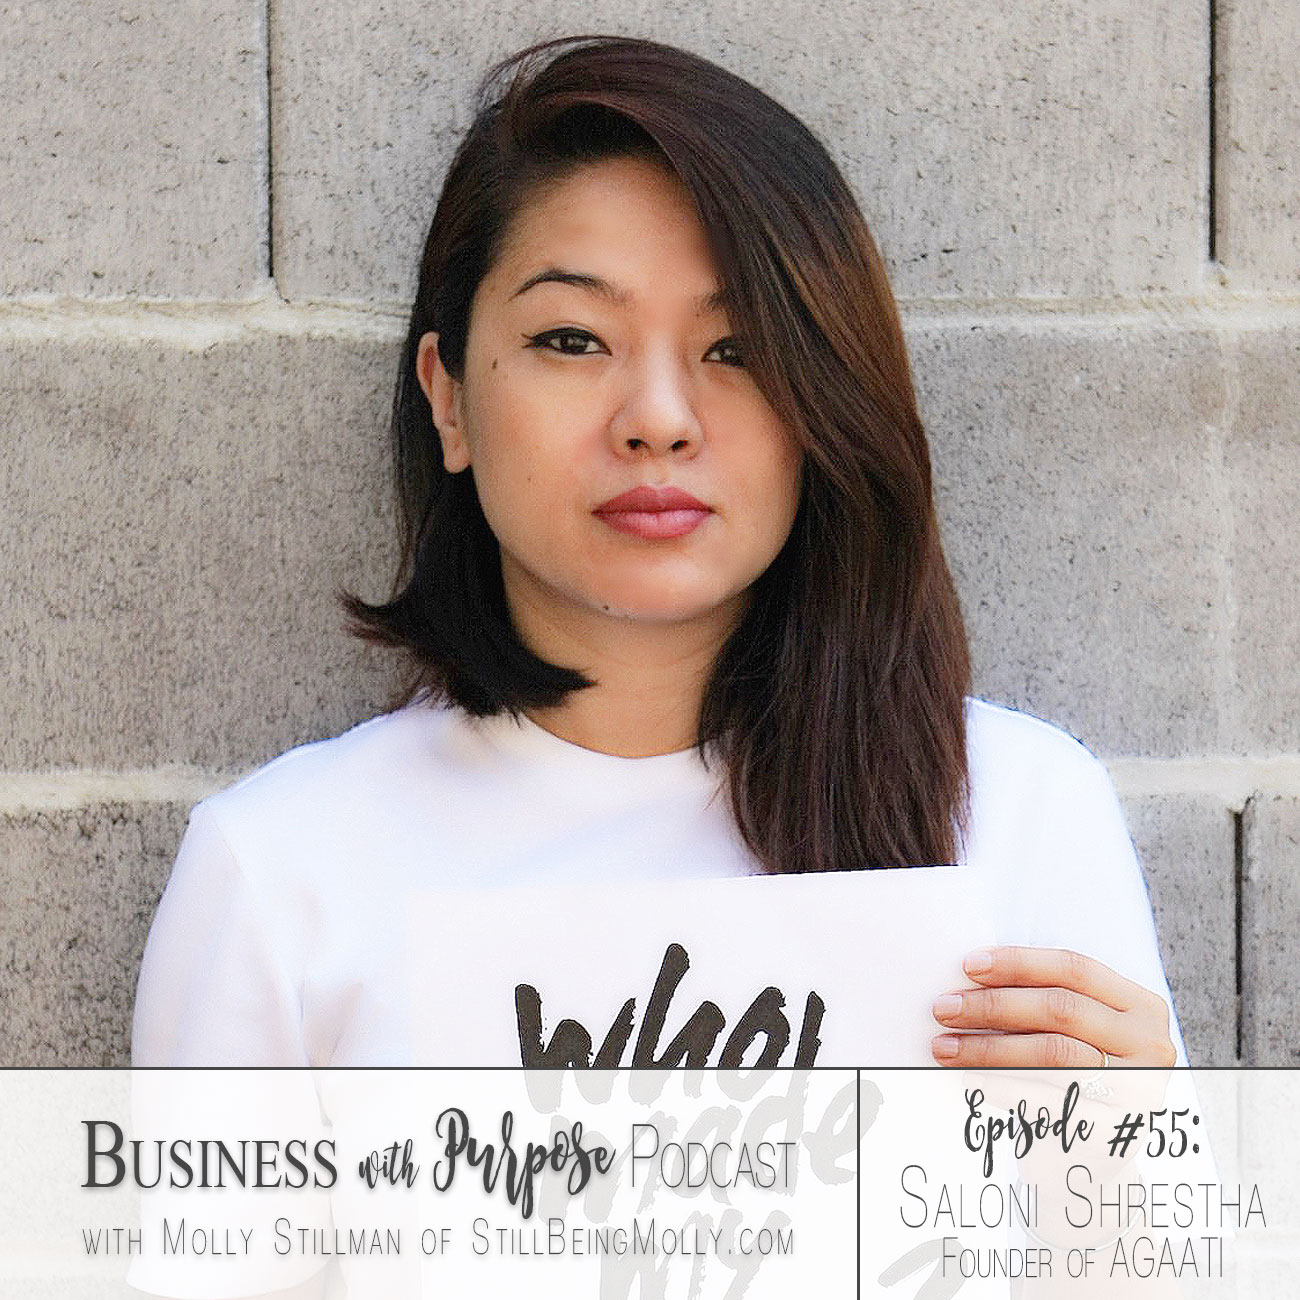 EP 55: Saloni Shrestha, Co-Founder of AGAATI by North Carolina ethical blogger Still Being Molly